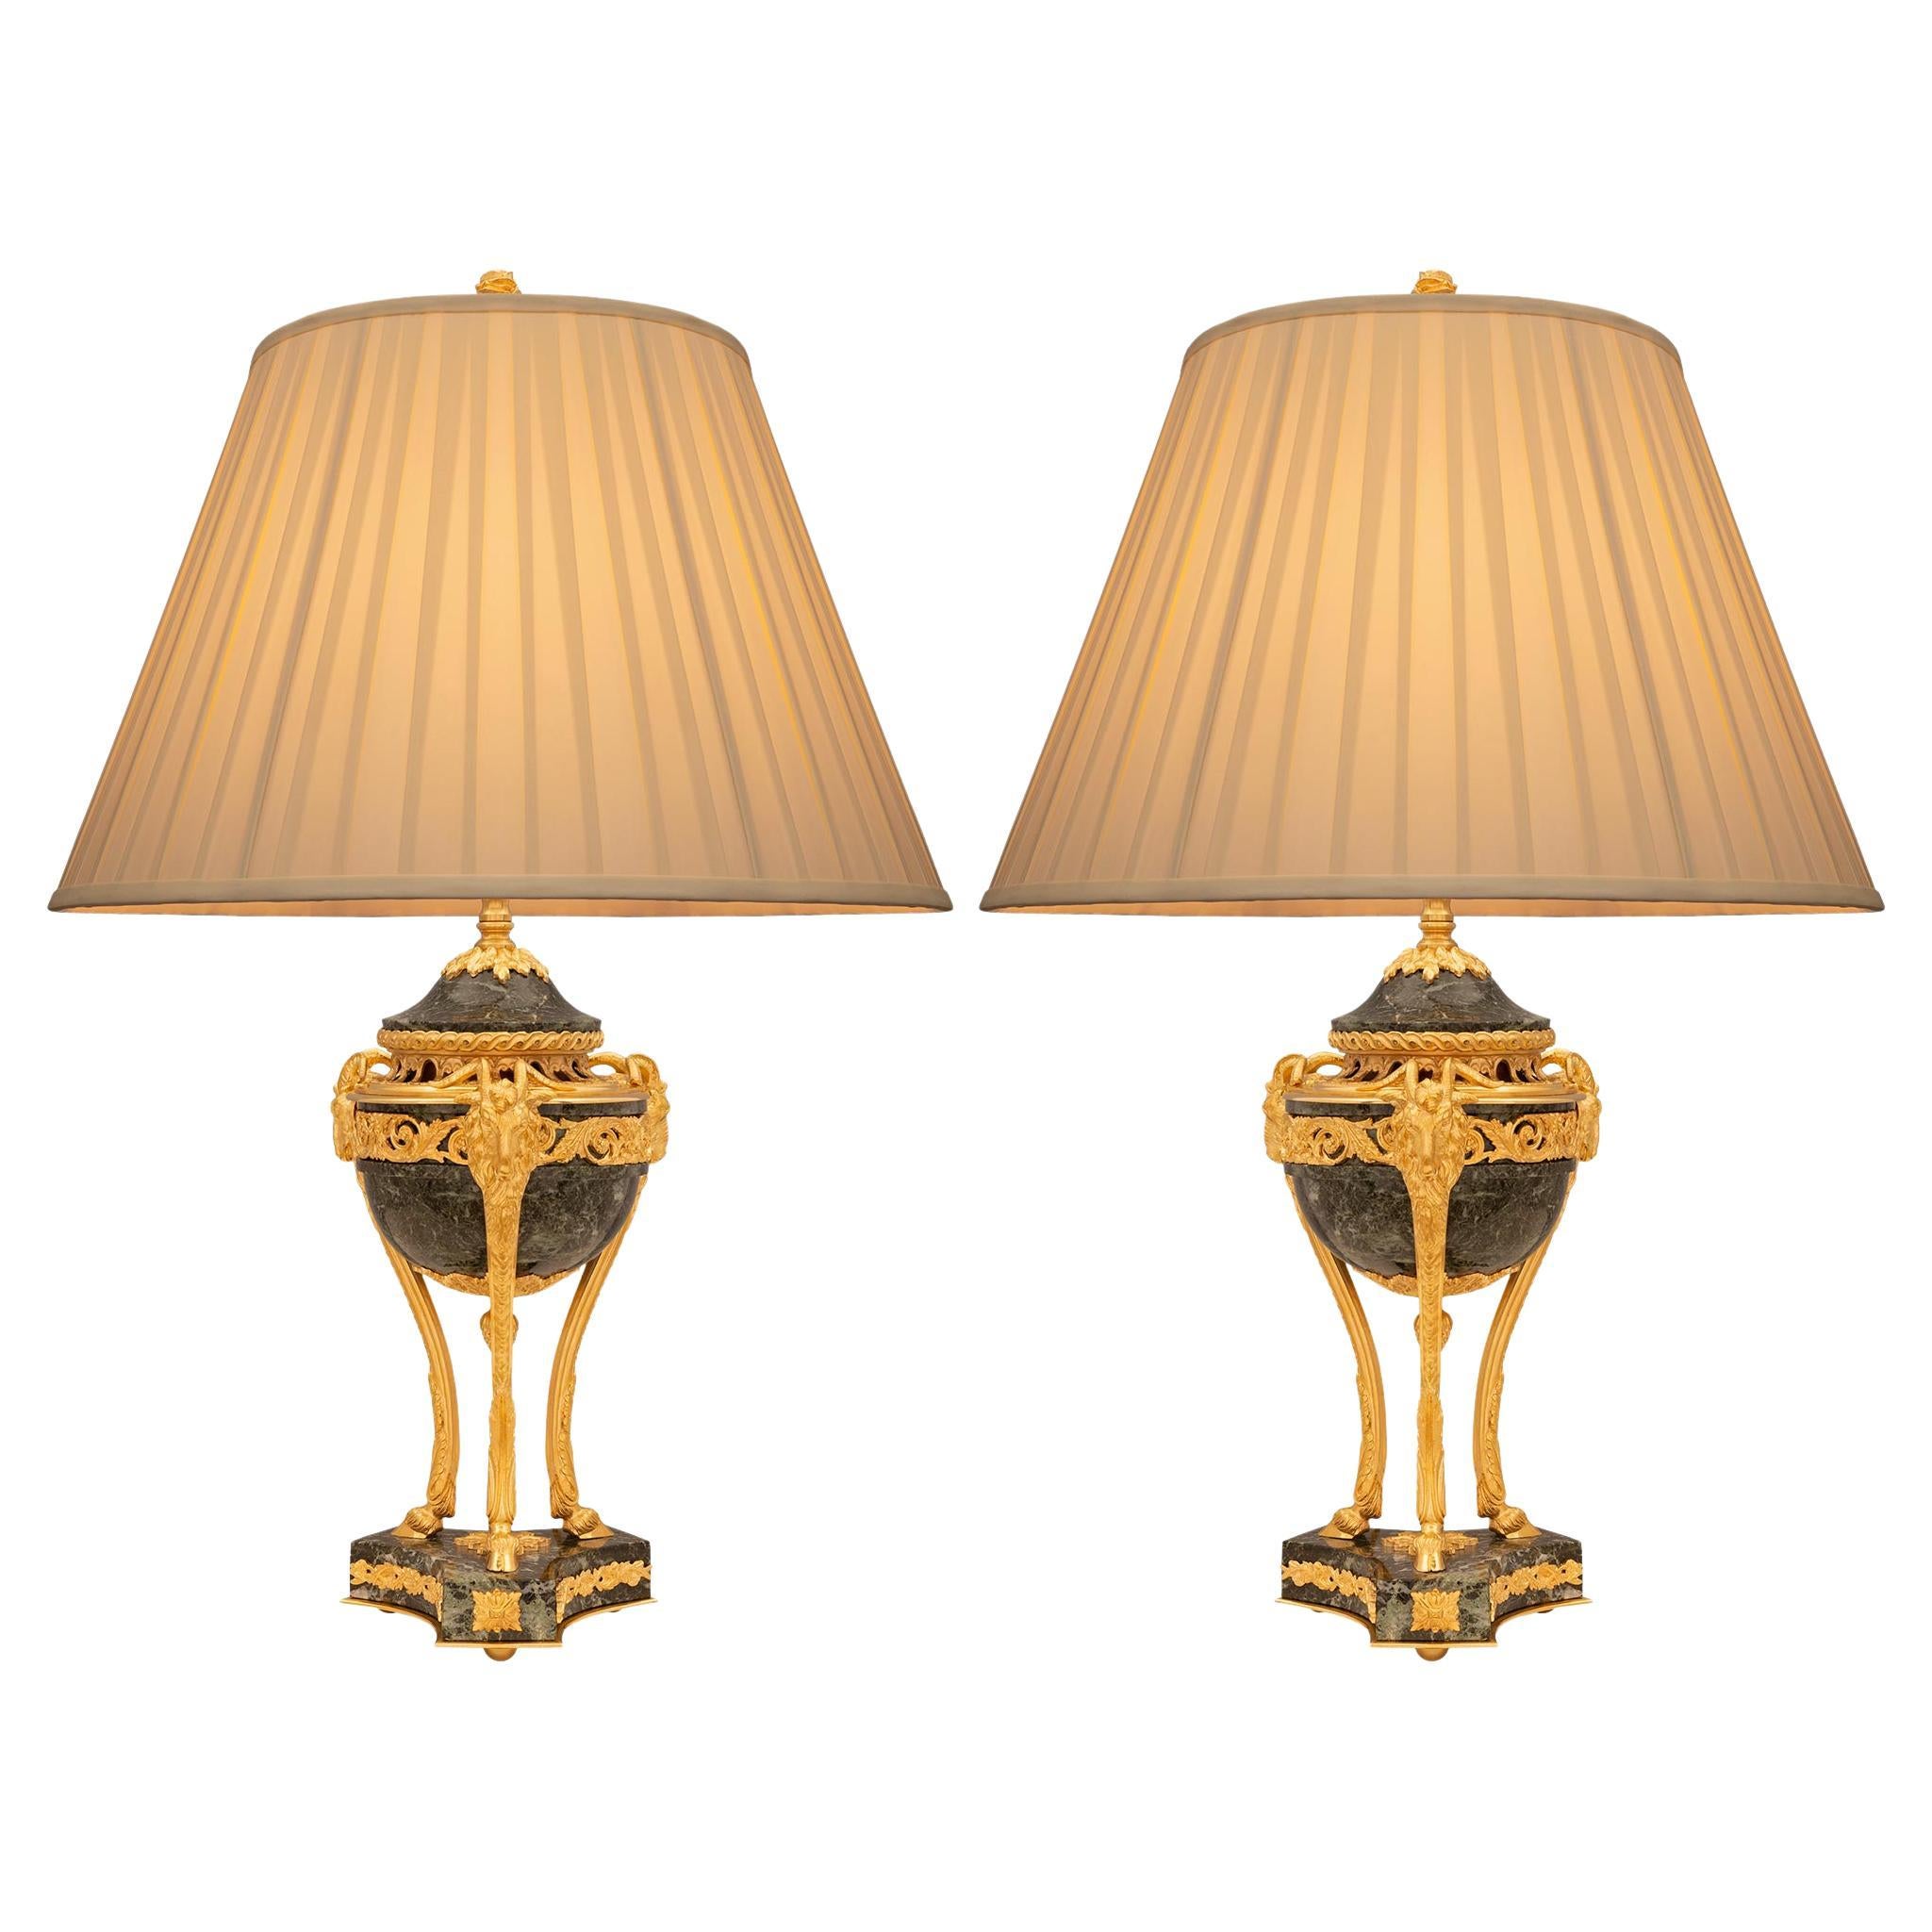 Pair of French 19th Century Belle Époque Period Marble and Ormolu Lamps For Sale